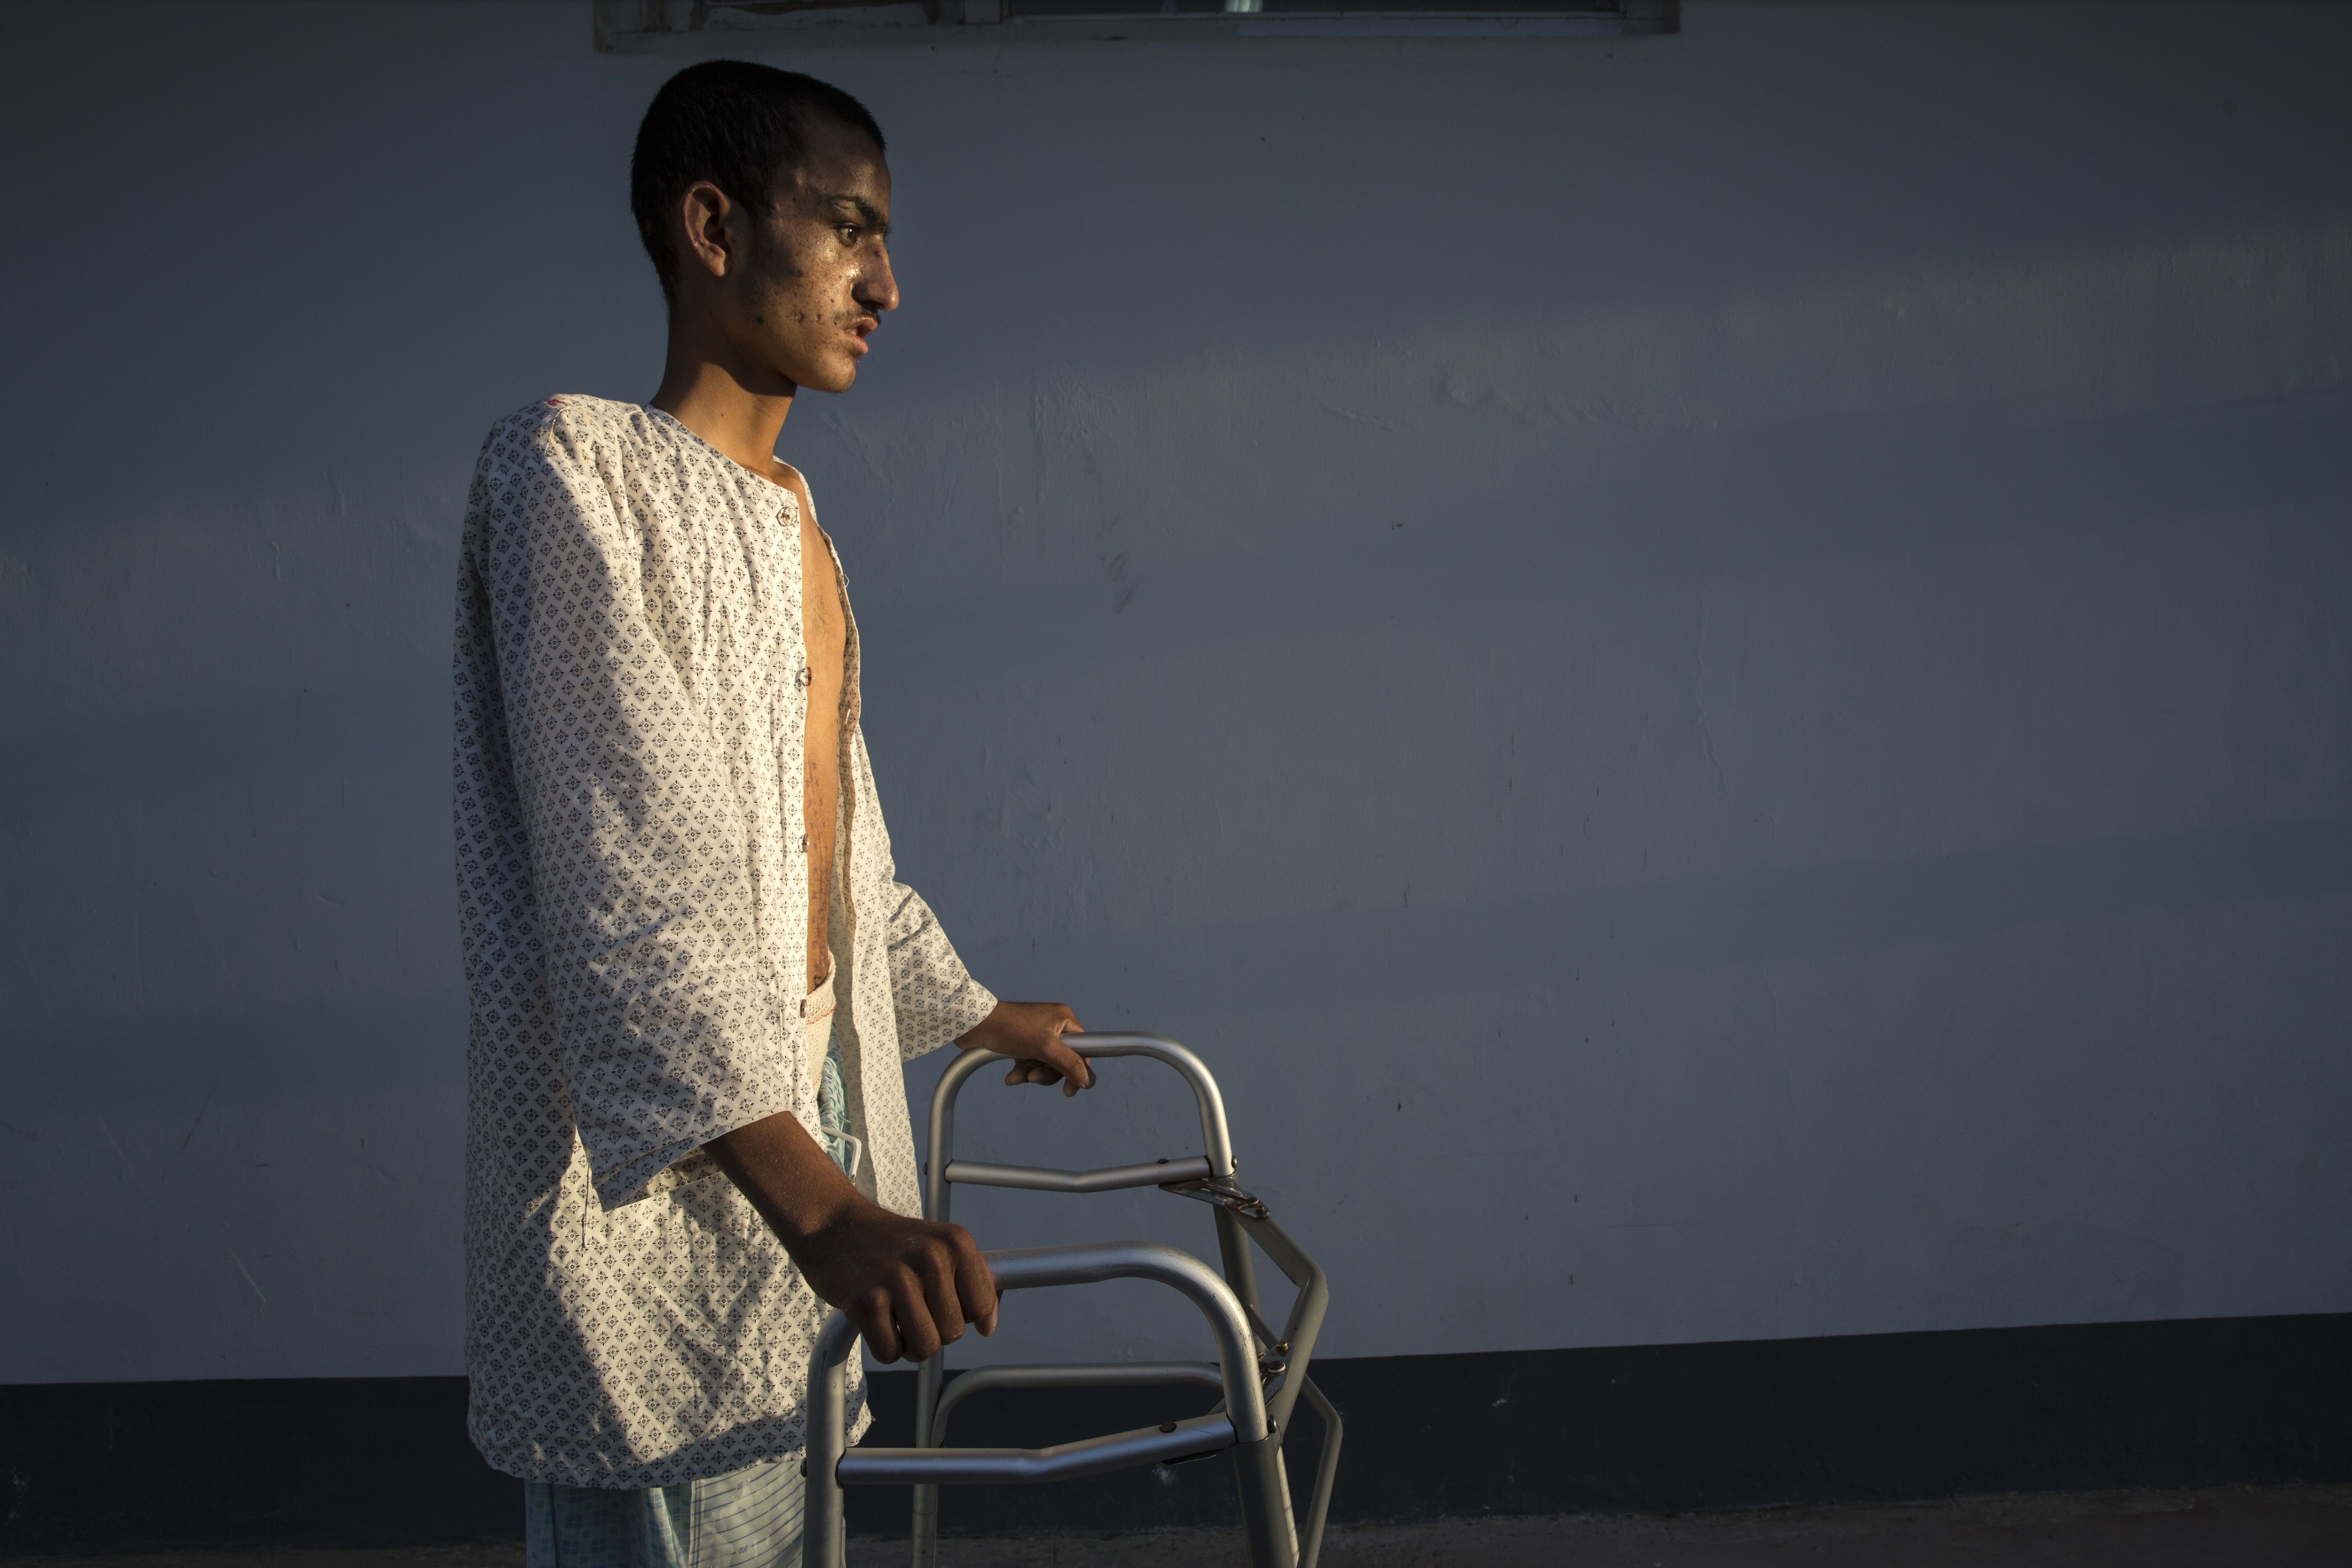 Ahah Kahn is a shepherd from Helmand, but today he is barely able to walk due to a brain injury from an incendiary explosive device. Image by Paula Bronstein. Afghanistan, 2015. 